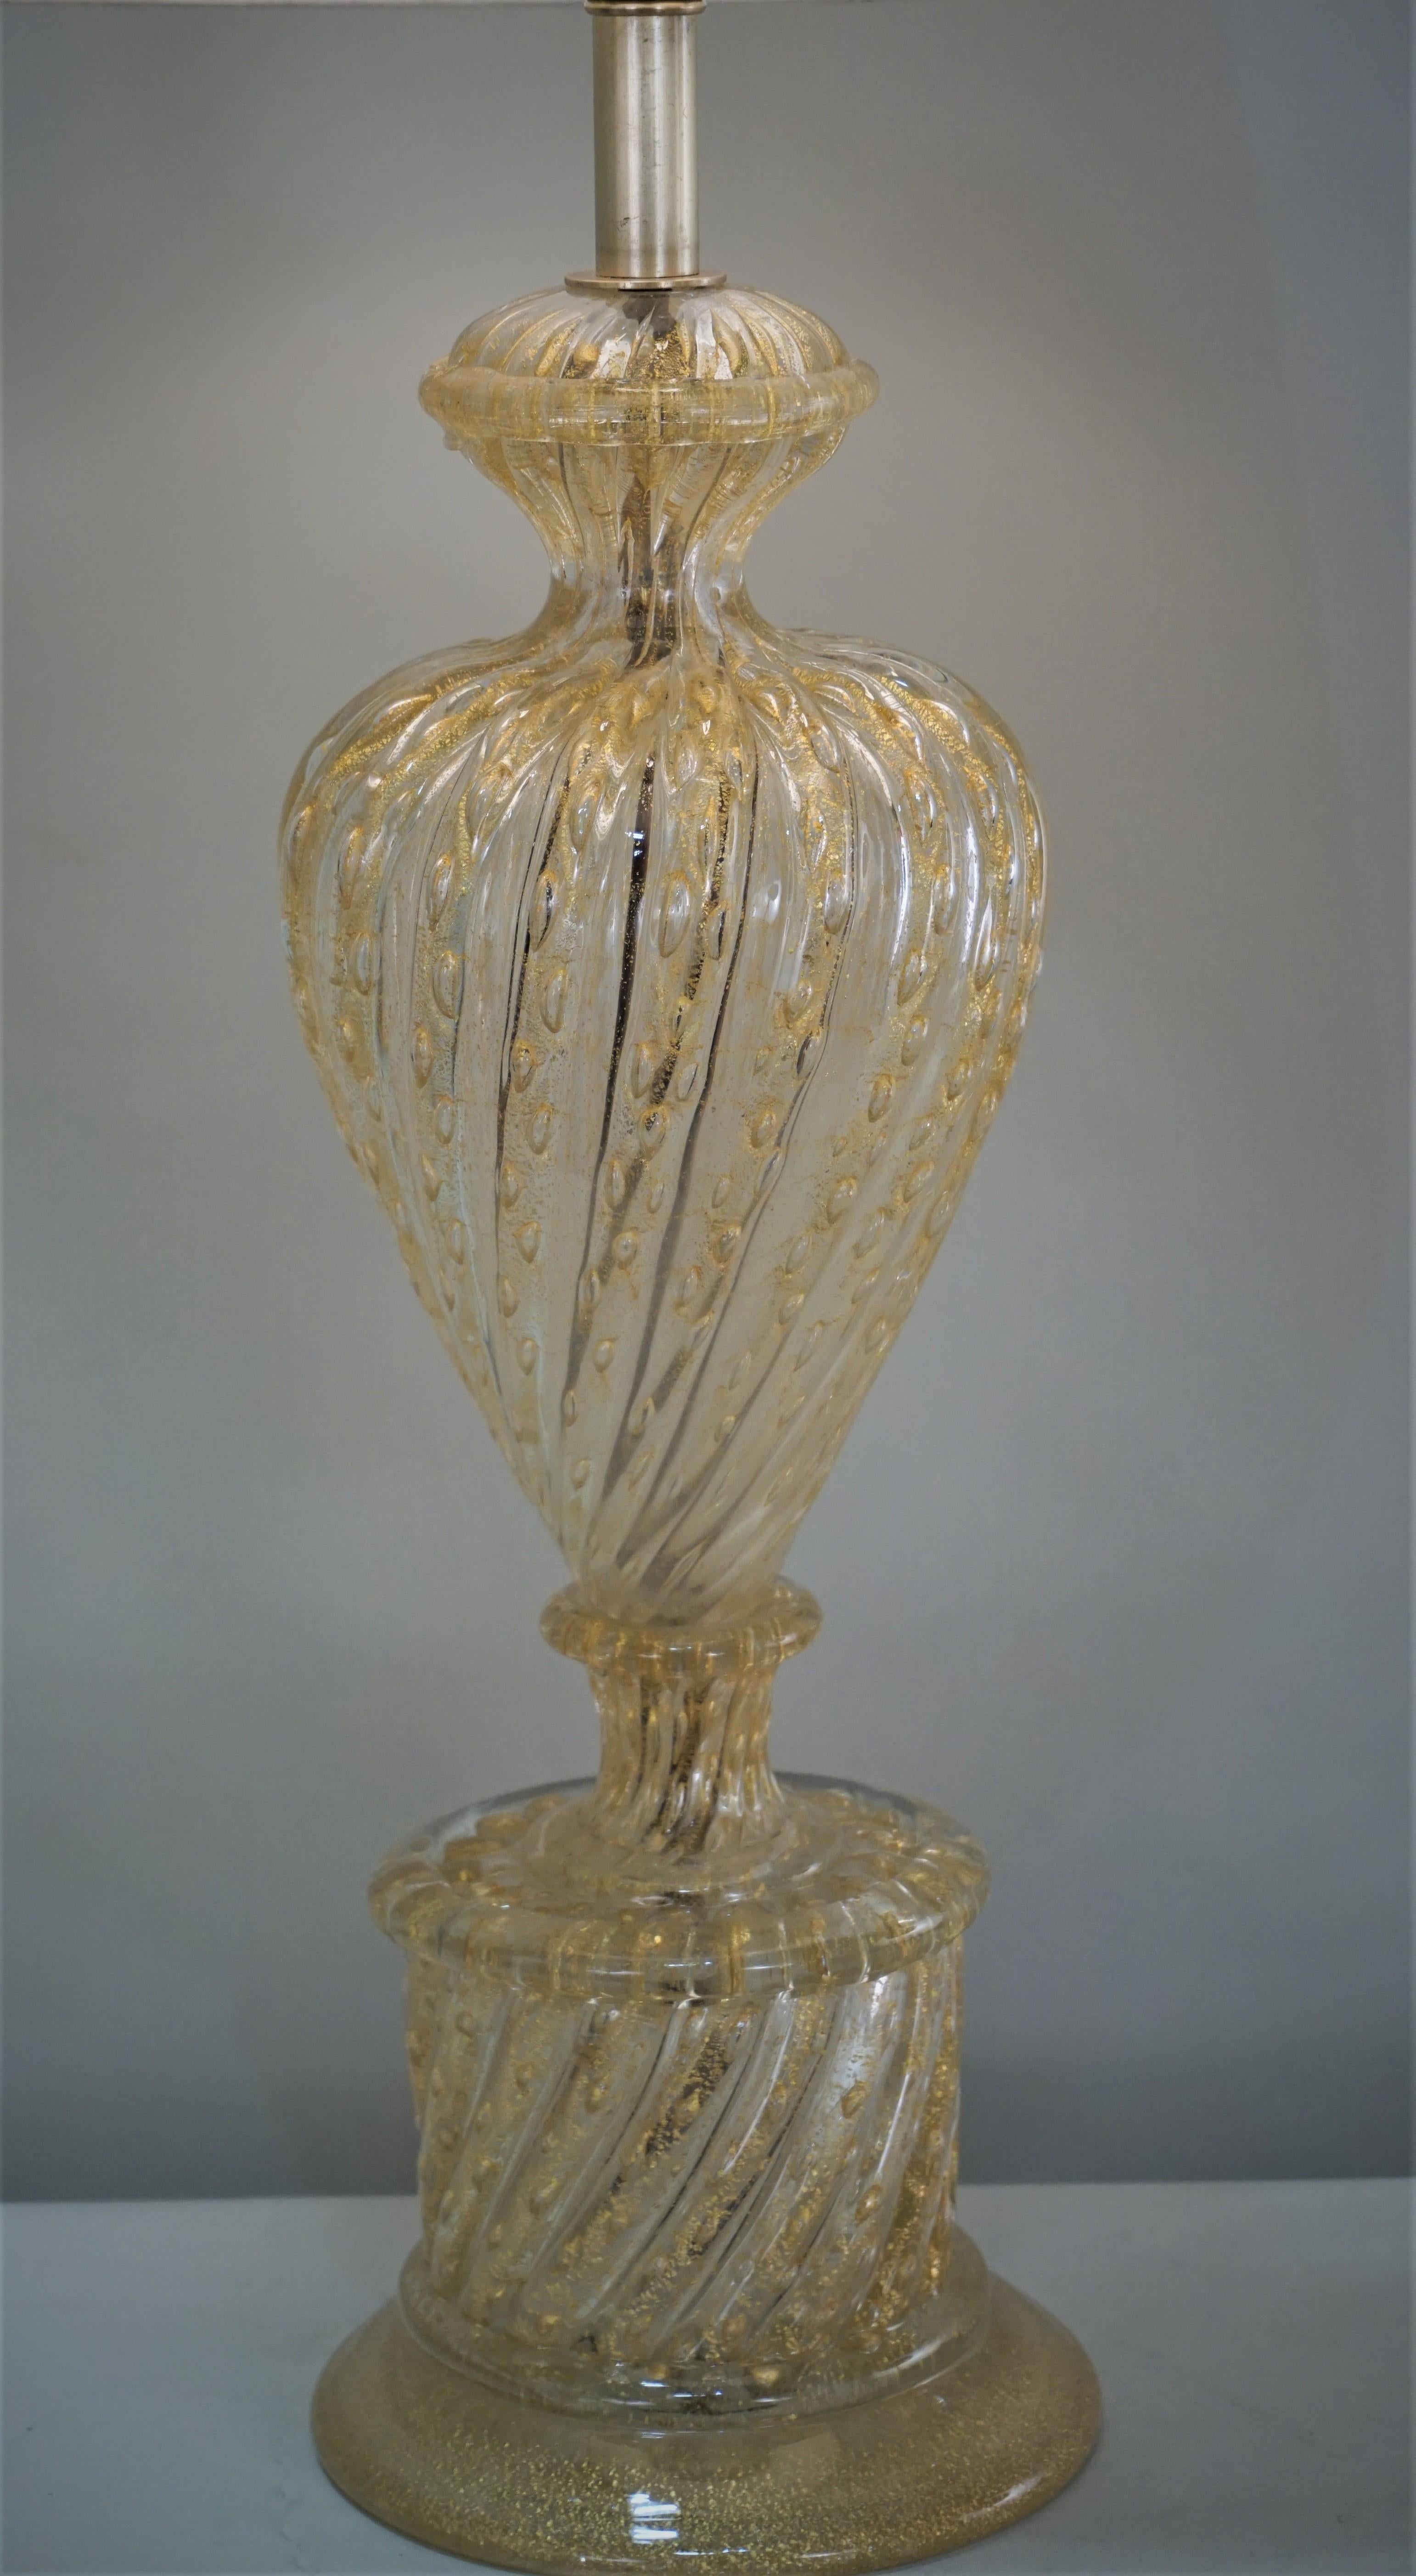 Beautifui hand blown Murano glass table lamp, with a touch of gold. See image two for glass detail. Murano glass is prized for its superior craftsmanship; this piece does an excellent job of showcasing it's longevity and beauty.
      